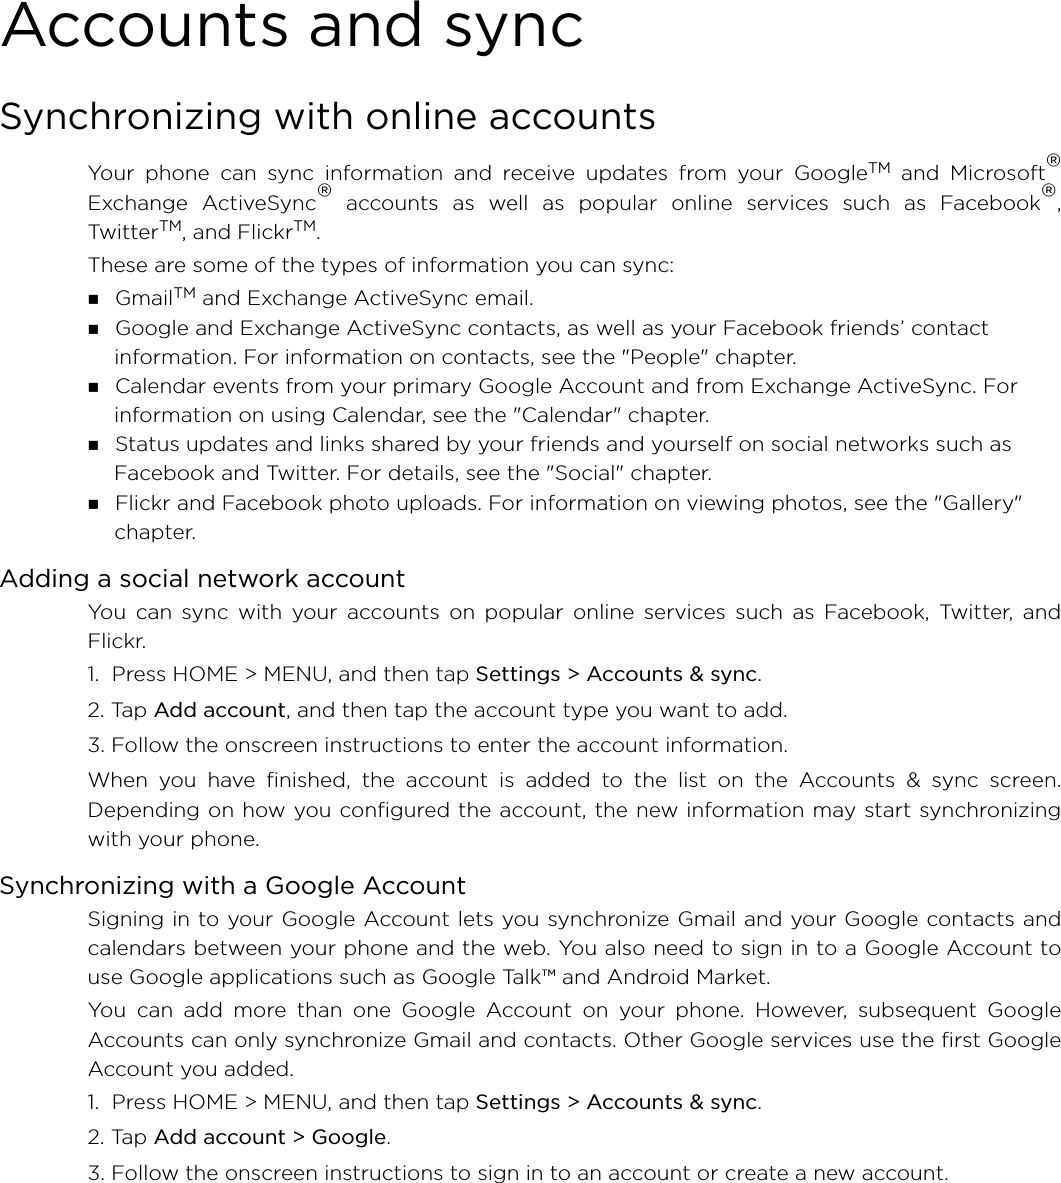 Accounts and syncSynchronizing with online accountsYour phone can sync information and receive updates from your GoogleTM and Microsoft®Exchange ActiveSync® accounts as well as popular online services such as Facebook®,TwitterTM, and FlickrTM. These are some of the types of information you can sync: GmailTM and Exchange ActiveSync email. Google and Exchange ActiveSync contacts, as well as your Facebook friends’ contact information. For information on contacts, see the &quot;People&quot; chapter. Calendar events from your primary Google Account and from Exchange ActiveSync. For information on using Calendar, see the &quot;Calendar&quot; chapter. Status updates and links shared by your friends and yourself on social networks such as Facebook and Twitter. For details, see the &quot;Social&quot; chapter. Flickr and Facebook photo uploads. For information on viewing photos, see the &quot;Gallery&quot; chapter.Adding a social network accountYou can sync with your accounts on popular online services such as Facebook, Twitter, andFlickr.1.  Press HOME &gt; MENU, and then tap Settings &gt; Accounts &amp; sync. 2. Tap Add account, and then tap the account type you want to add.3. Follow the onscreen instructions to enter the account information.When you have finished, the account is added to the list on the Accounts &amp; sync screen.Depending on how you configured the account, the new information may start synchronizingwith your phone.Synchronizing with a Google AccountSigning in to your Google Account lets you synchronize Gmail and your Google contacts andcalendars between your phone and the web. You also need to sign in to a Google Account touse Google applications such as Google Talk™ and Android Market.You can add more than one Google Account on your phone. However, subsequent GoogleAccounts can only synchronize Gmail and contacts. Other Google services use the first GoogleAccount you added.1.  Press HOME &gt; MENU, and then tap Settings &gt; Accounts &amp; sync. 2. Tap Add account &gt; Google.3. Follow the onscreen instructions to sign in to an account or create a new account.